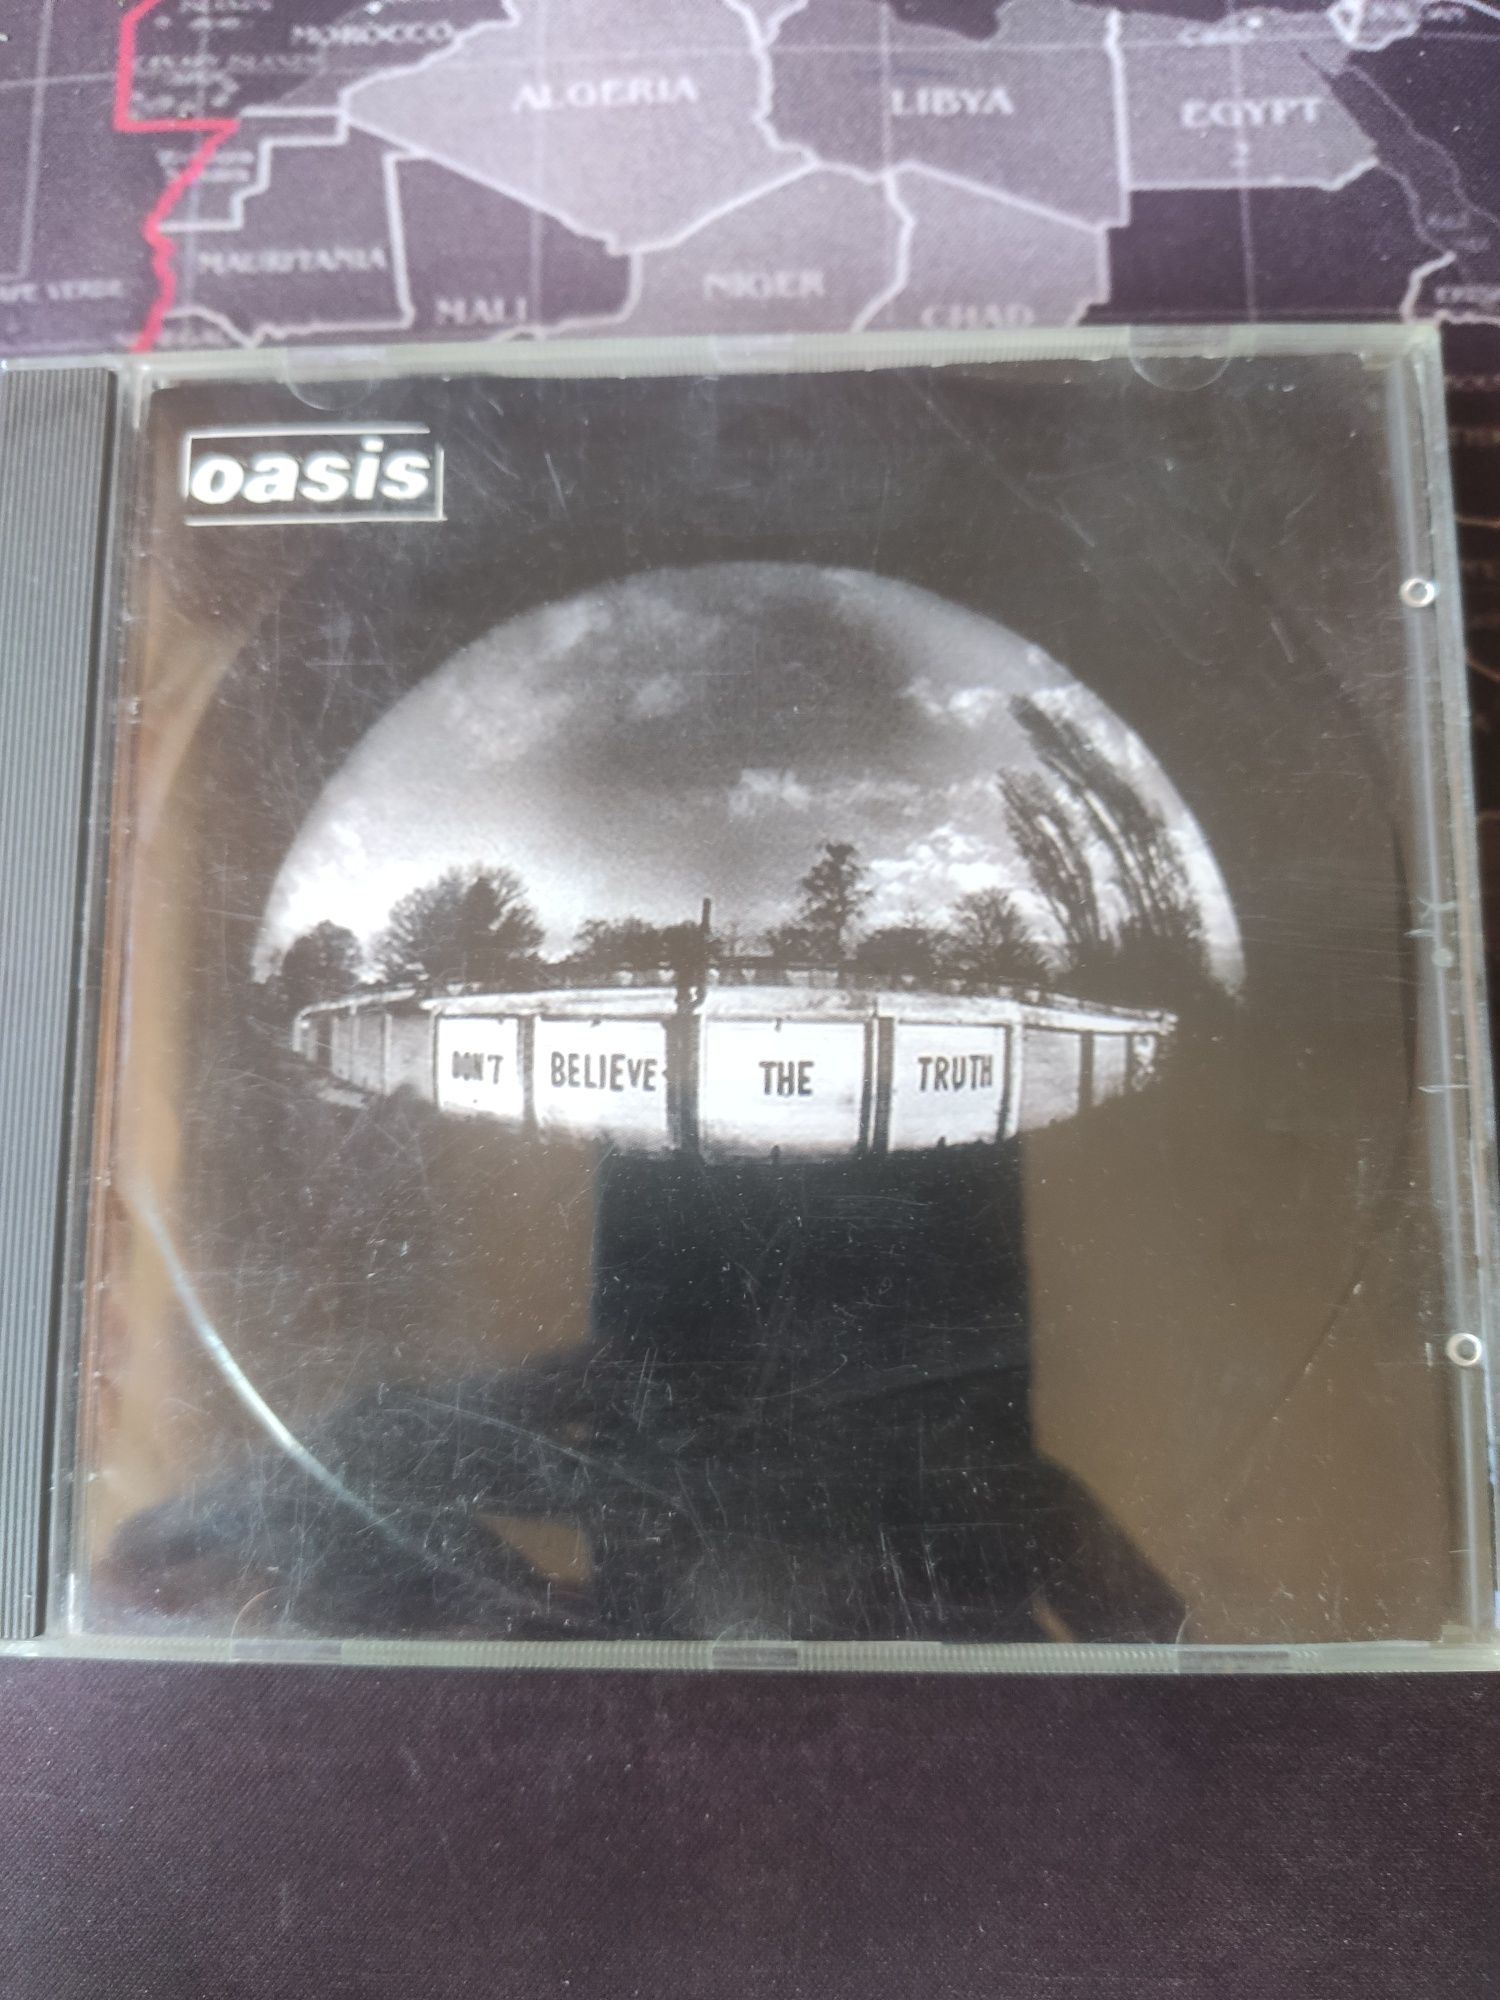 Płyta CD Oasis Be Here Now + Oasis Don't believe the truth